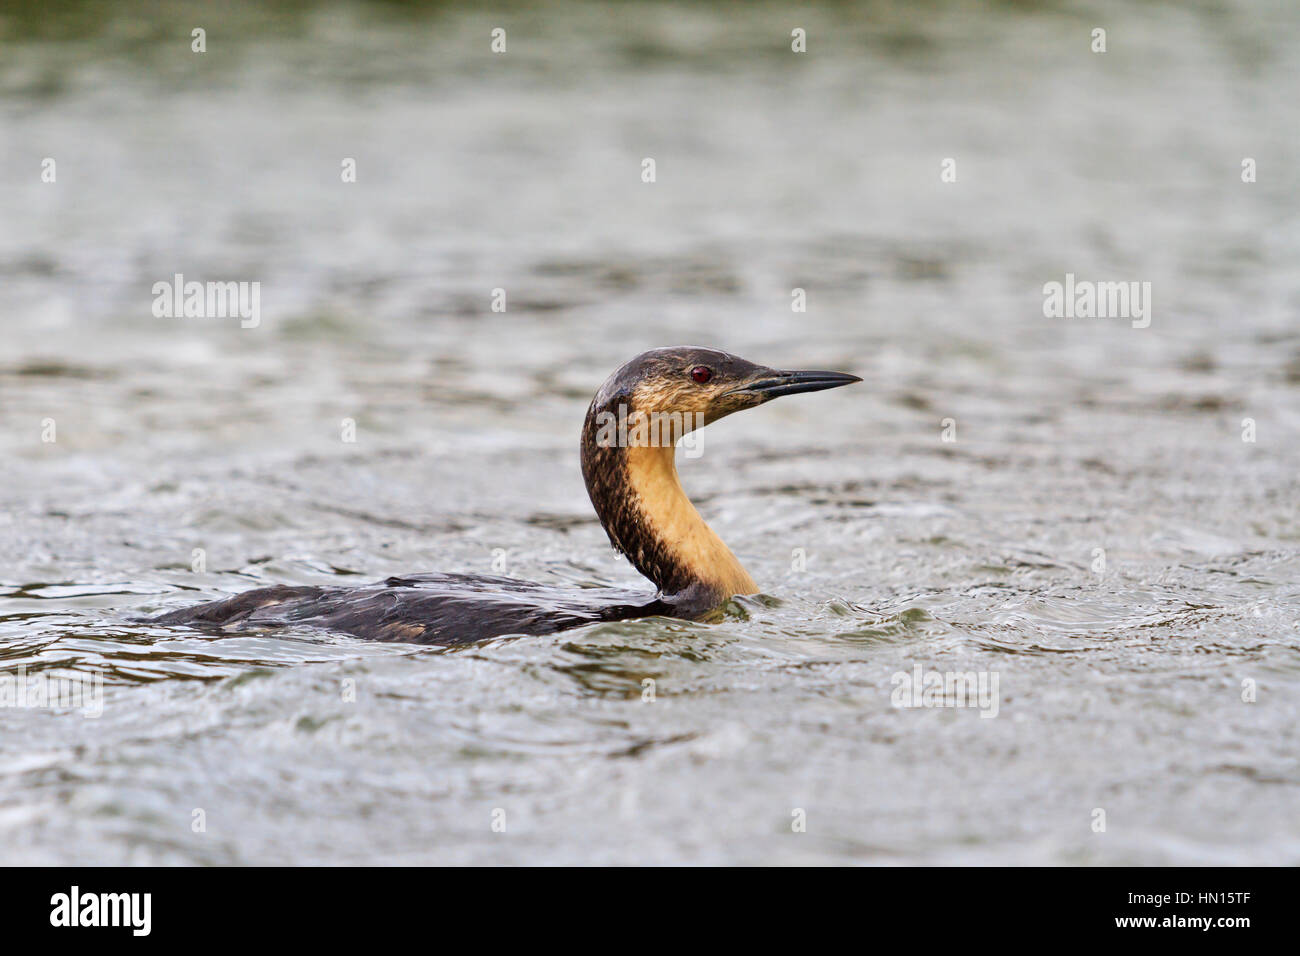 Black-throated loon emerged from the water,arctic, north bird migration, a rare bird, wildlife Stock Photo